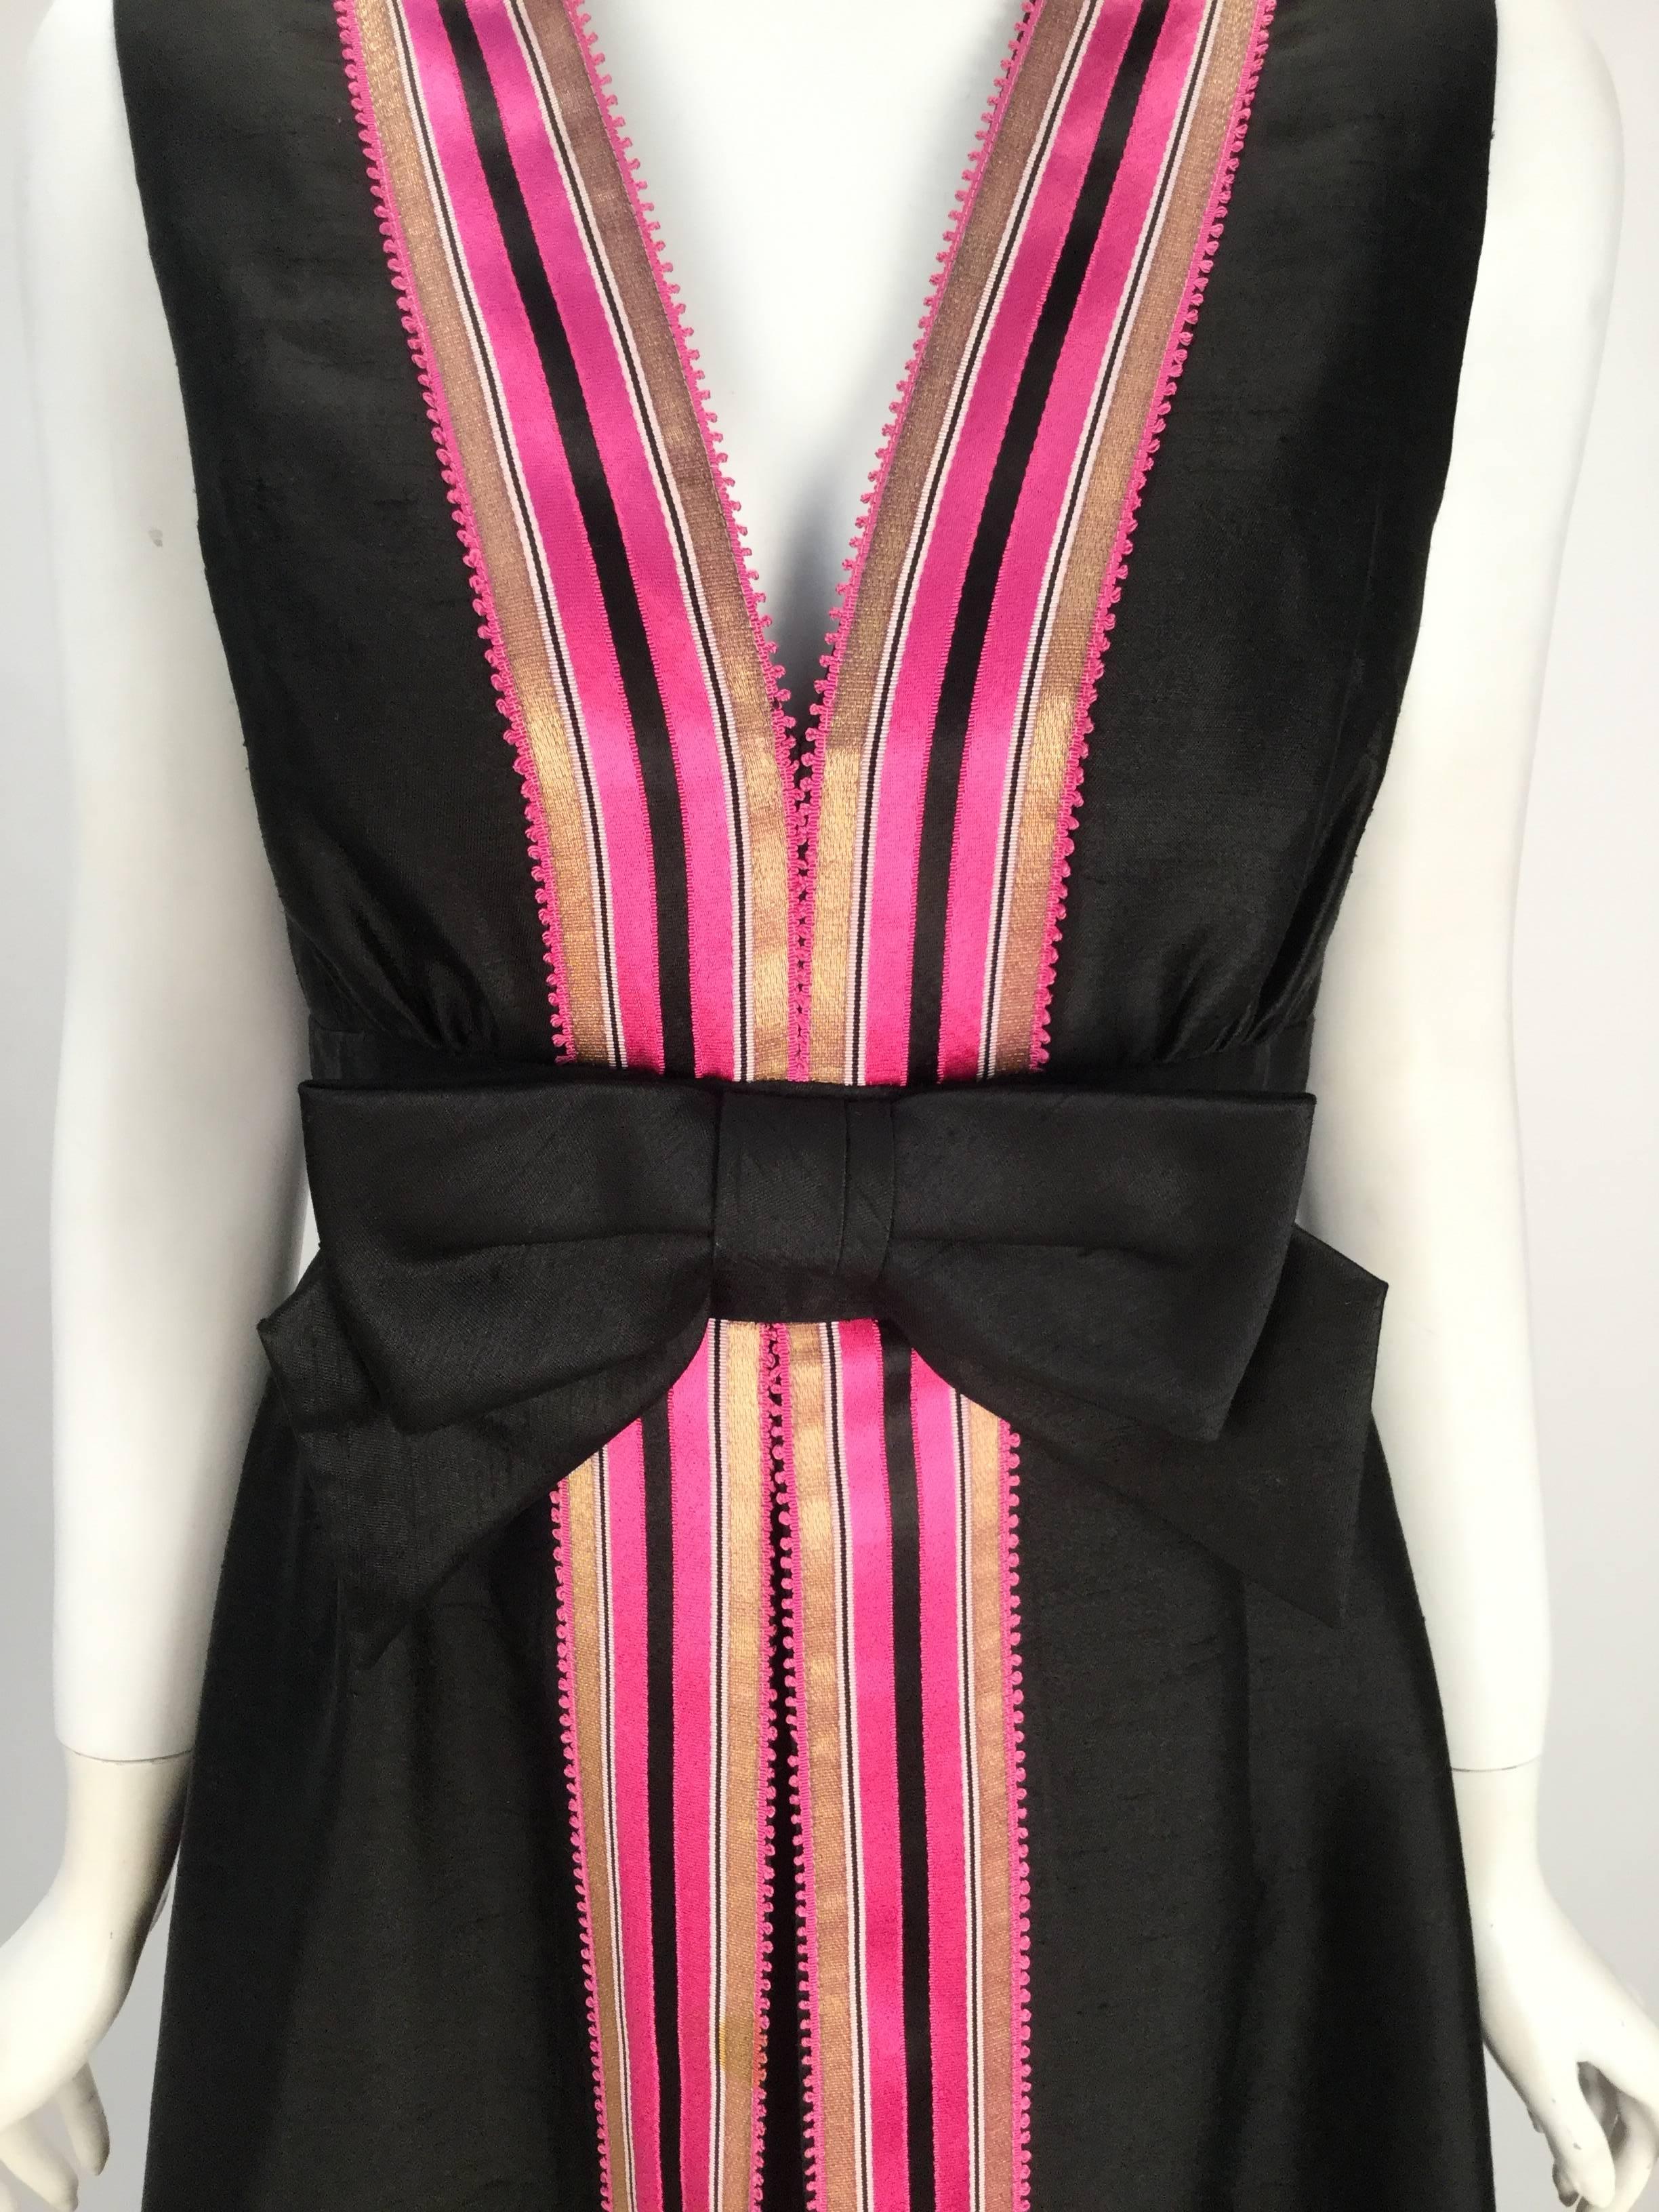 Wonderful 1960s Kent Originals Black dress featuring a fun a pink, gold and black ribbon trim descending its entire length. Front box pleat running from waist to floor. Large bow center front with a defined waist. Zip center back. Three hook and